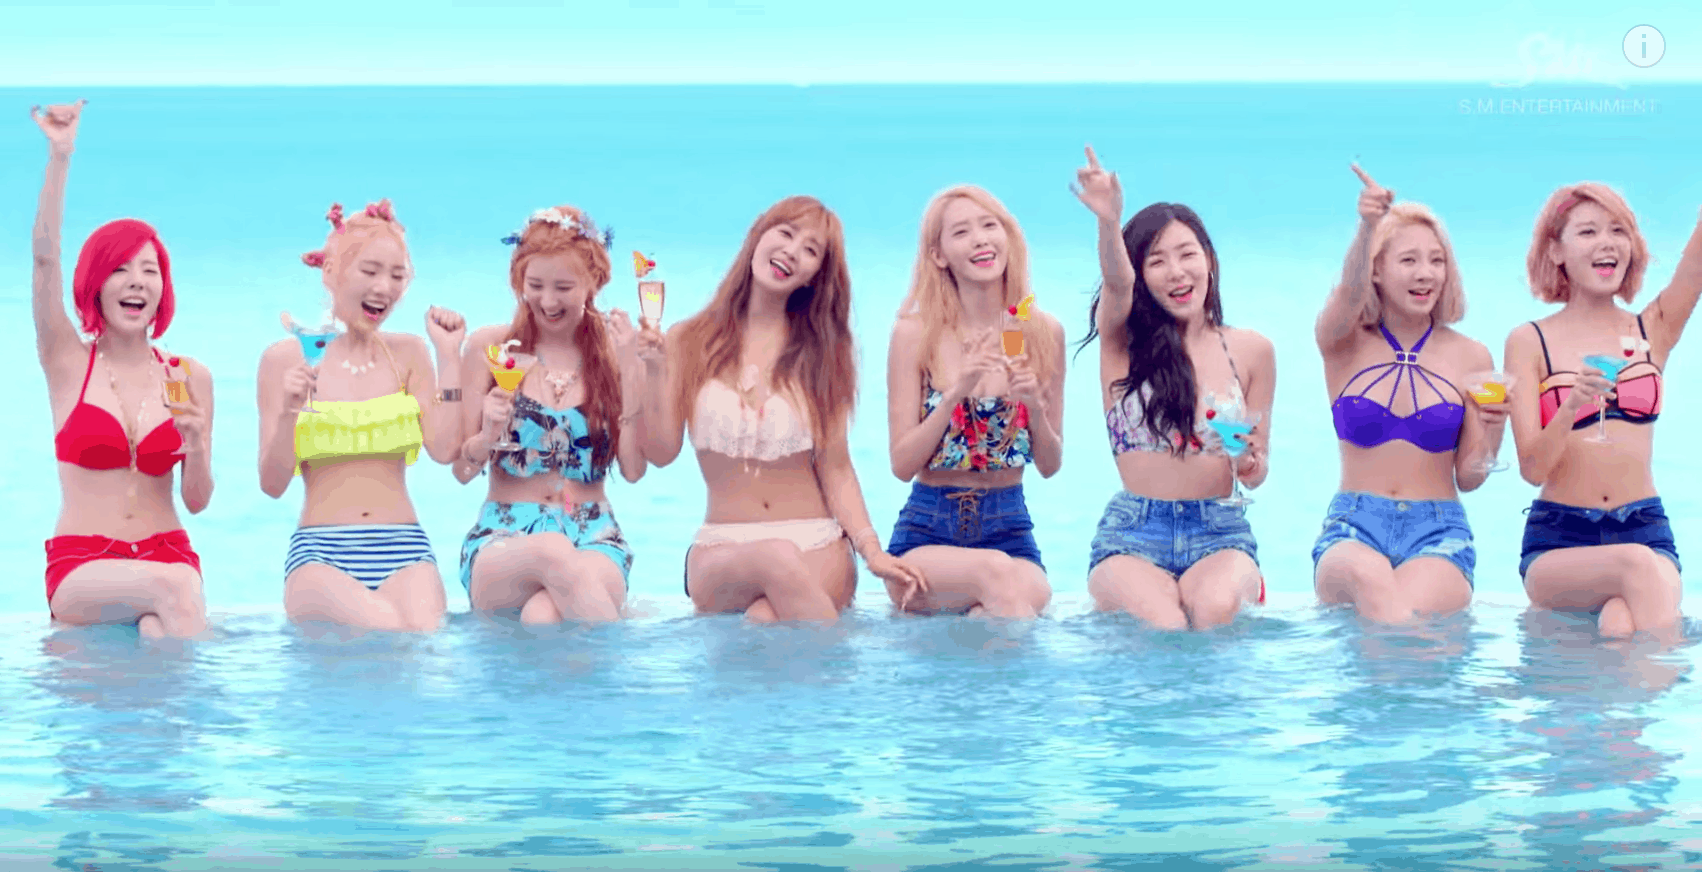 Girls Generation Party Music Video - picture of the girls wearing bikinis by the pool